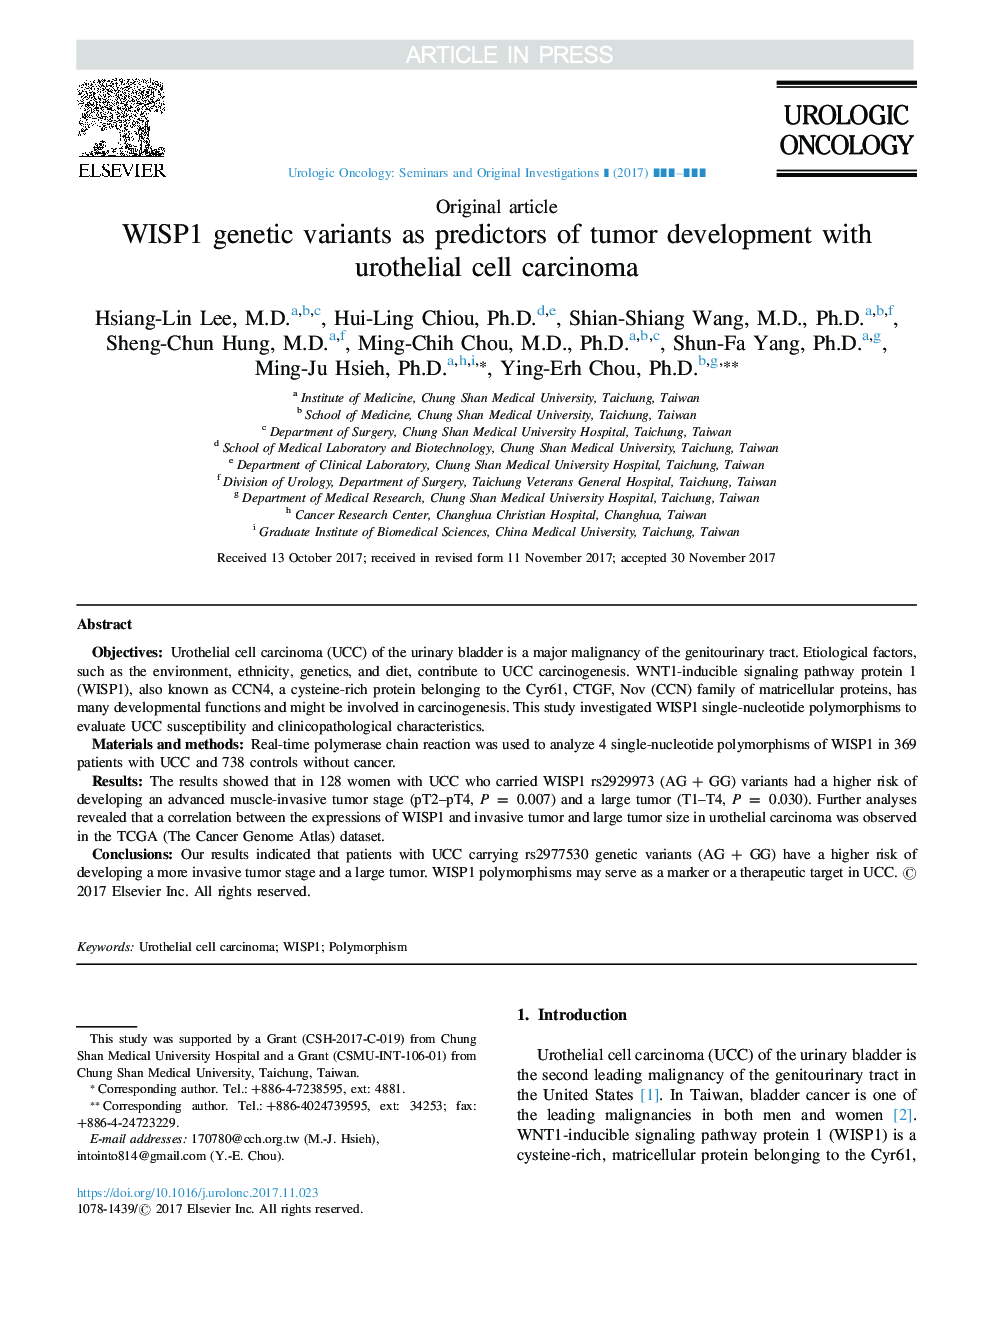 WISP1 genetic variants as predictors of tumor development with urothelial cell carcinoma